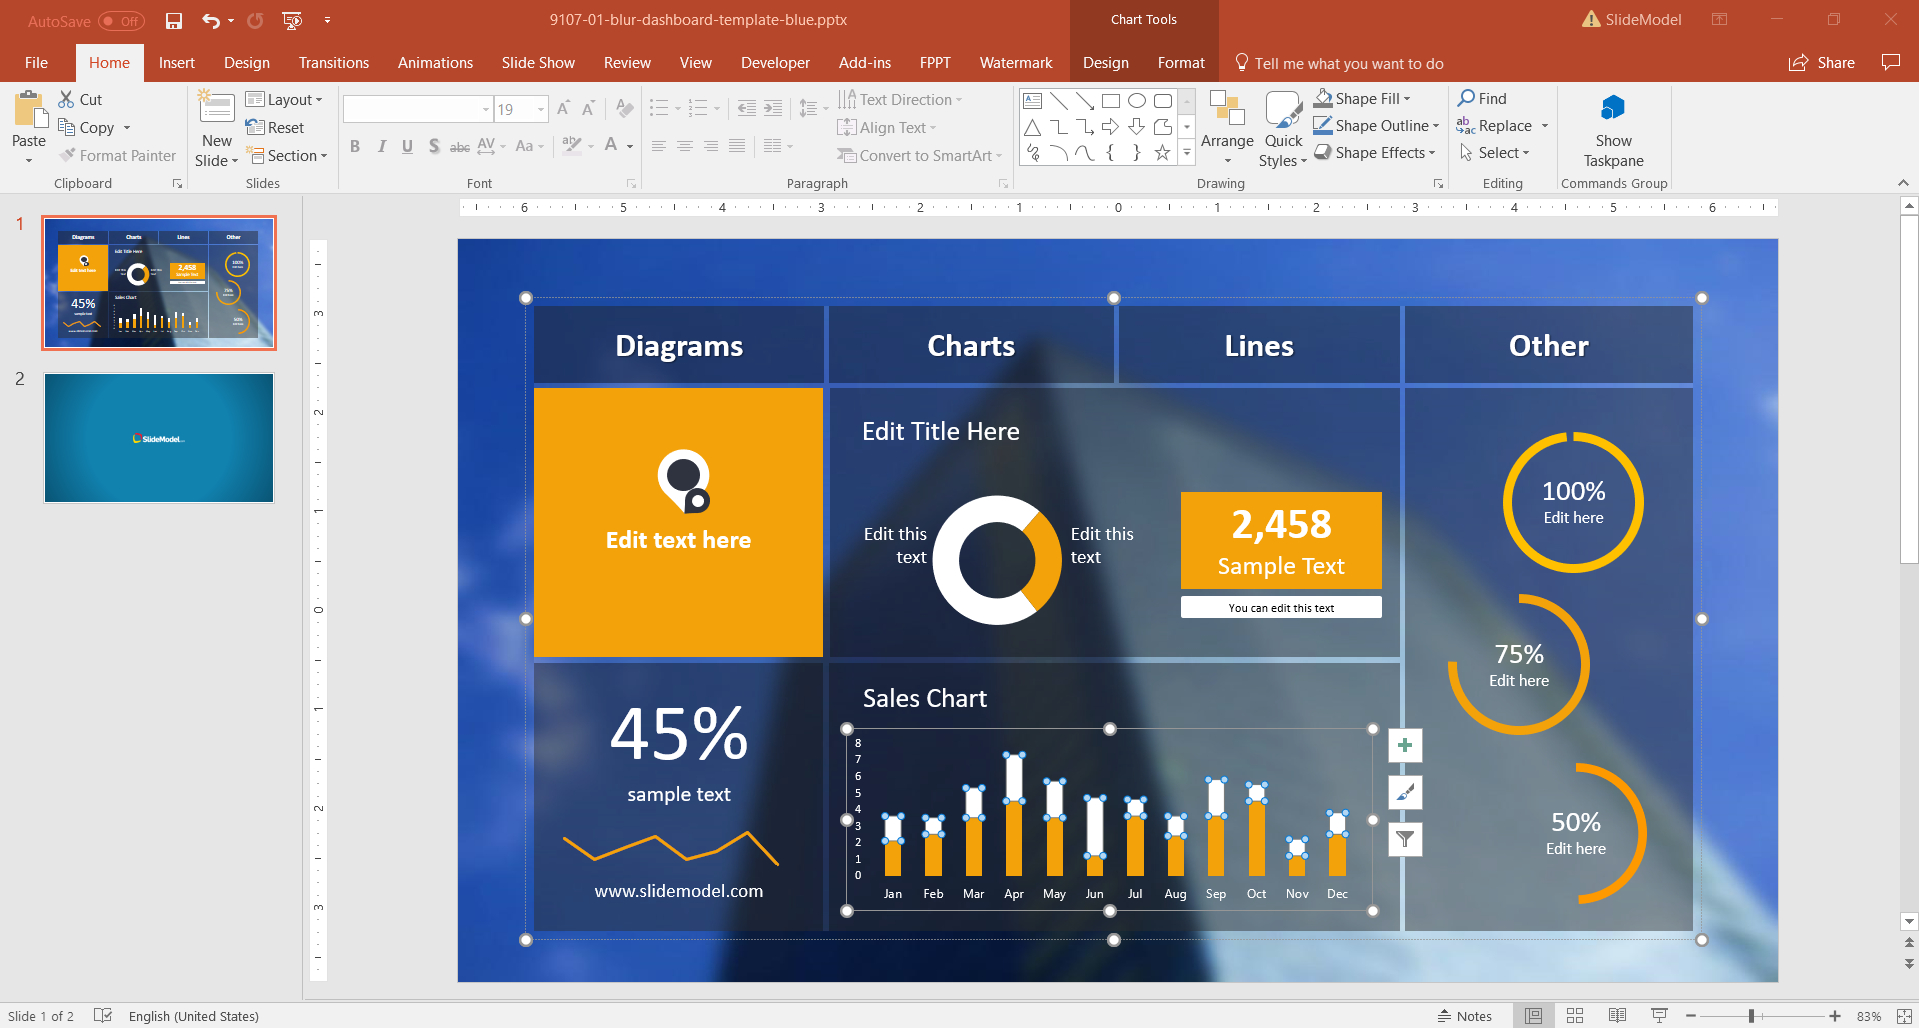 10 Best Dashboard Templates For Powerpoint Presentations Regarding Free Powerpoint Dashboard Template